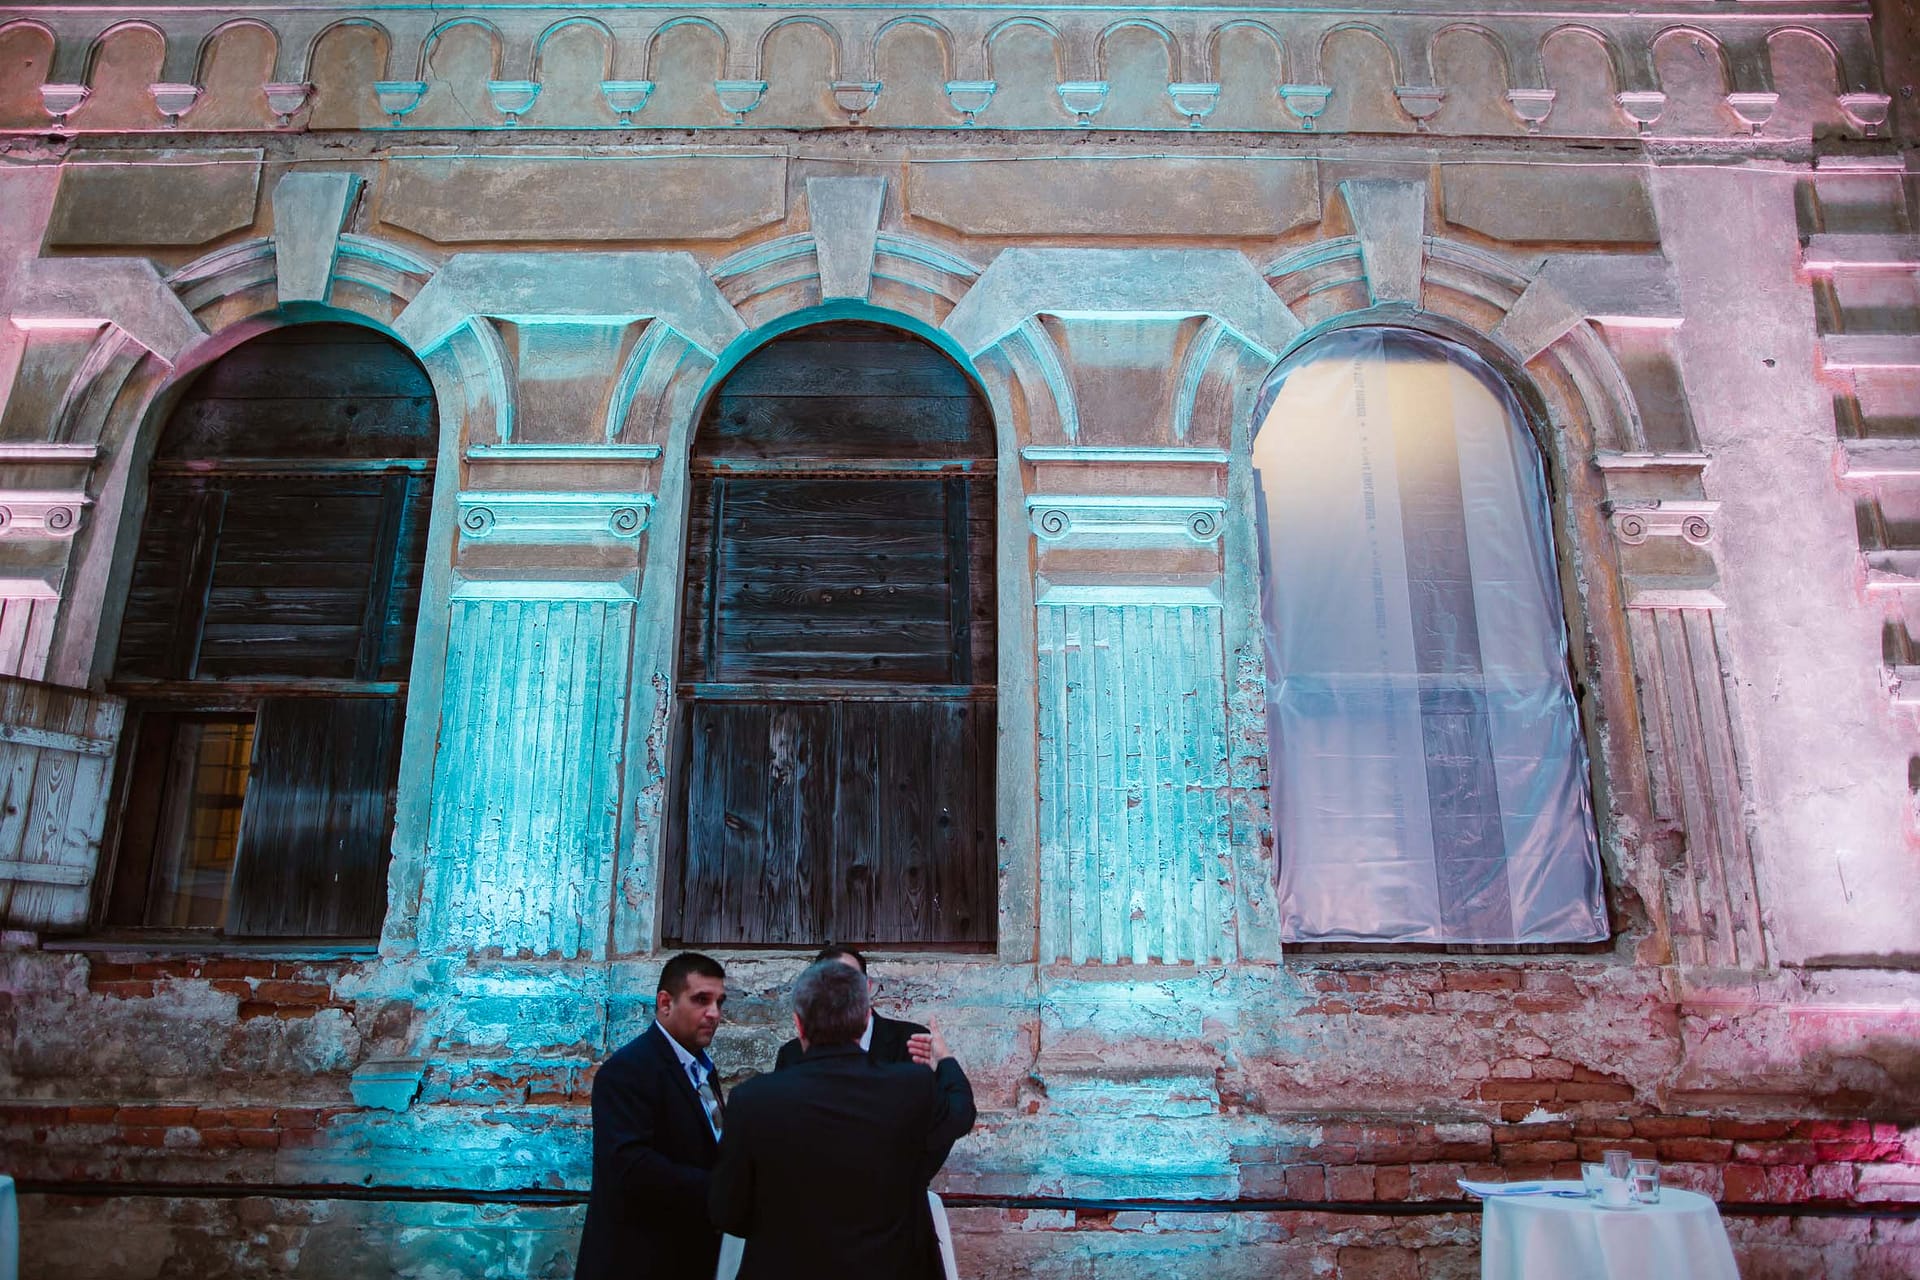 Special lighting on the Old Synagogue